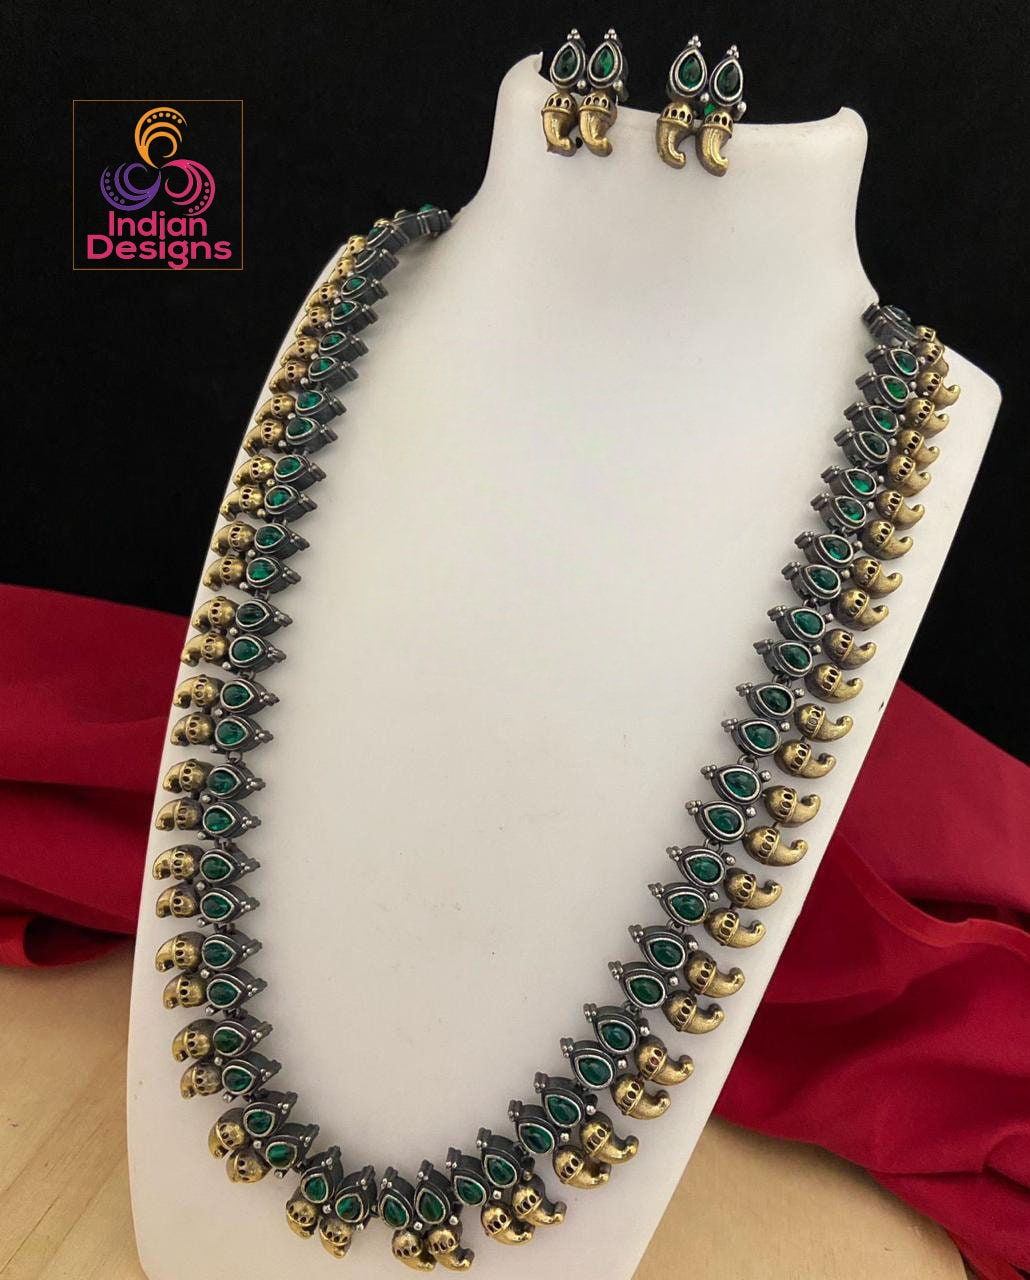 Oxidized Silver Two tone Long necklace, Emerald Green stone jewelry, Silver mango necklace, Indian Wedding Jewelry, German Silver necklace and Earrings, Long necklace for saree, Antique silver-Gold tone necklace, Indian Temple jewelry